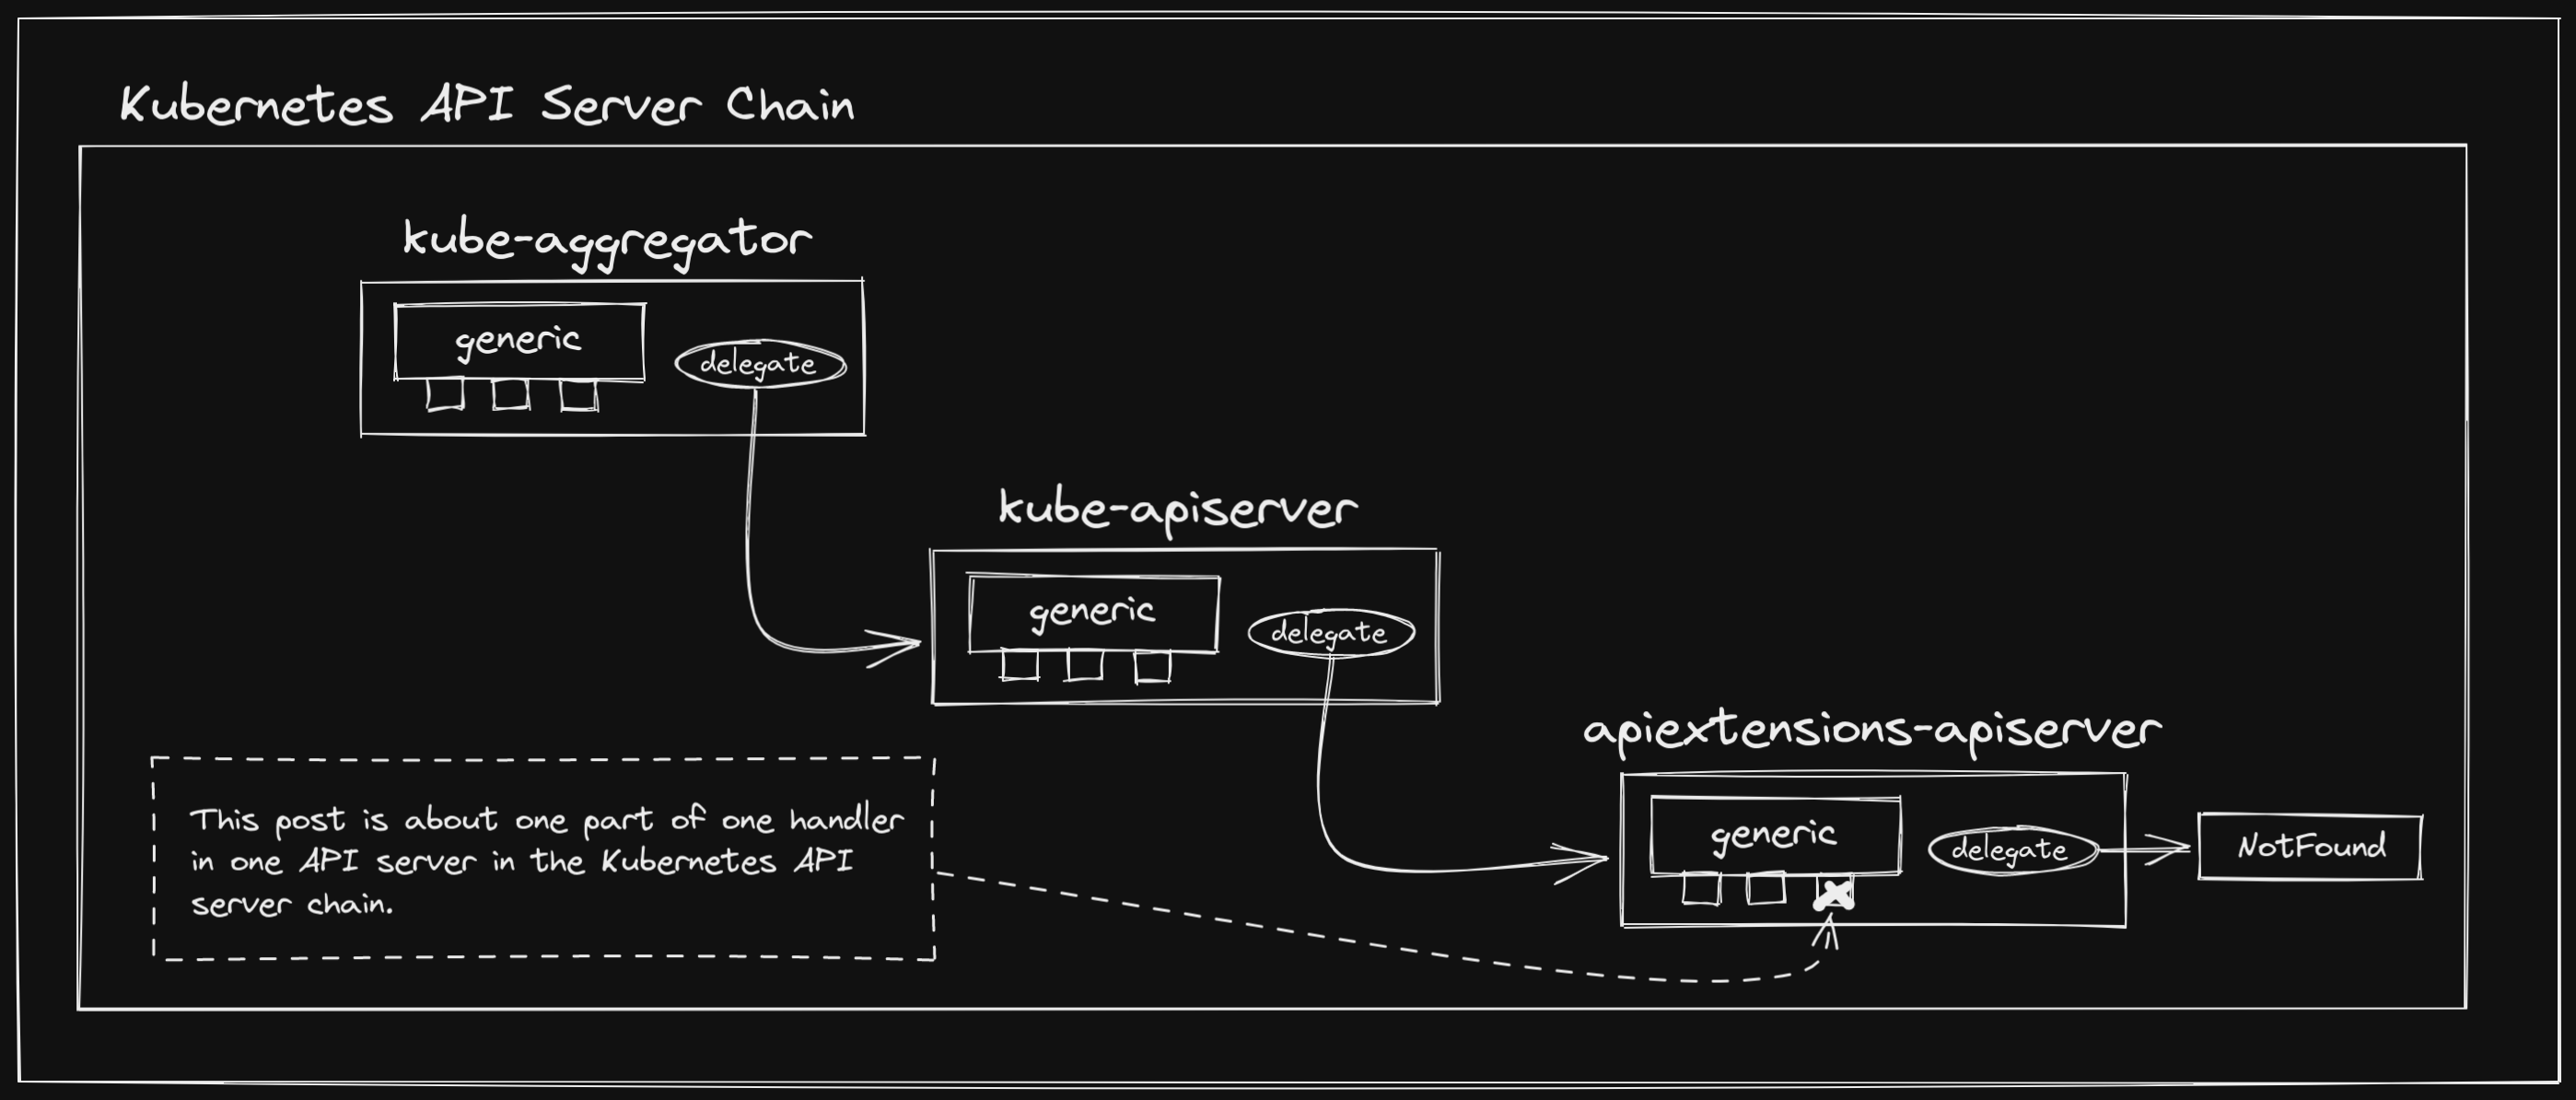 Image by Daniel Mangum — &lsquo;This post is about one part of one handler in one API server in the Kubernetes API server chain.&rsquo;